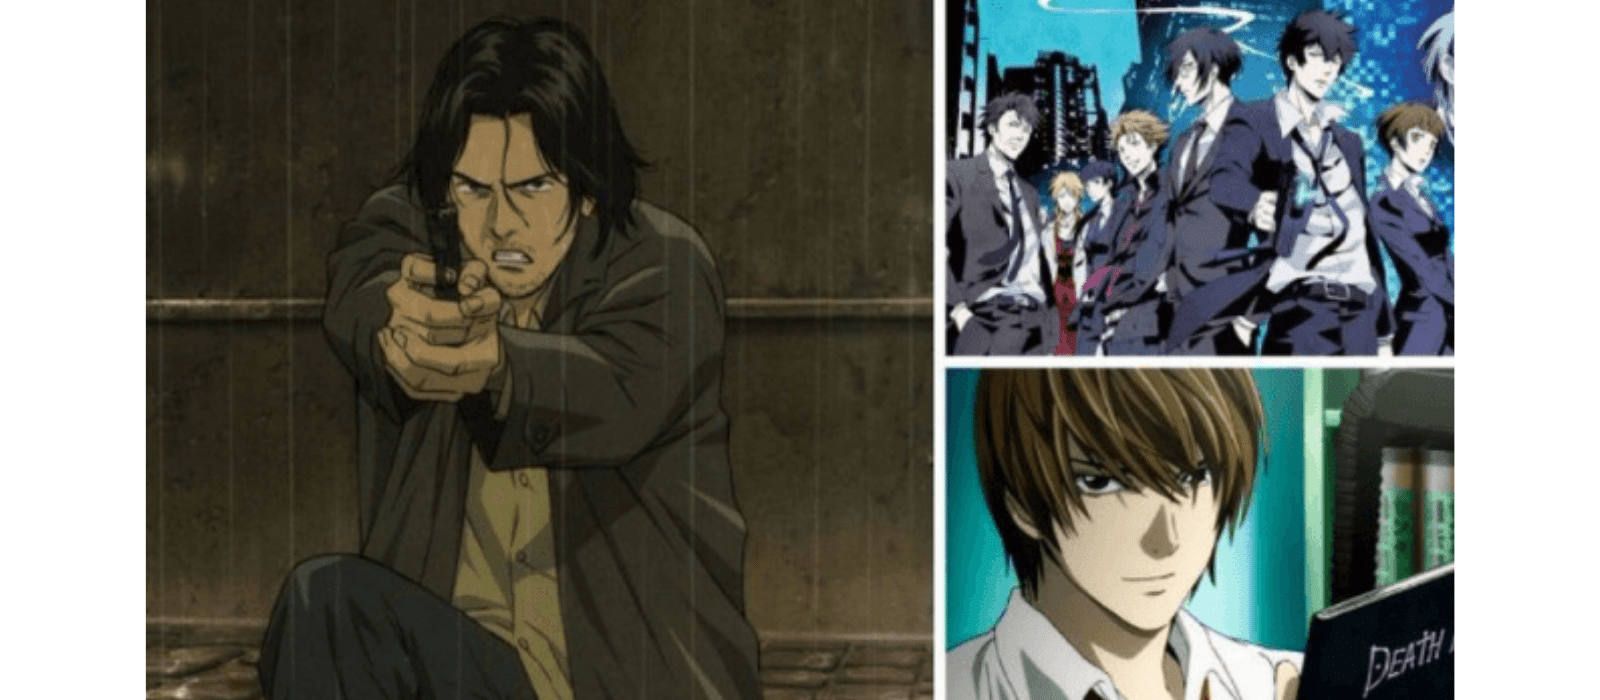 Best detective anime image with death note and monster on the cover